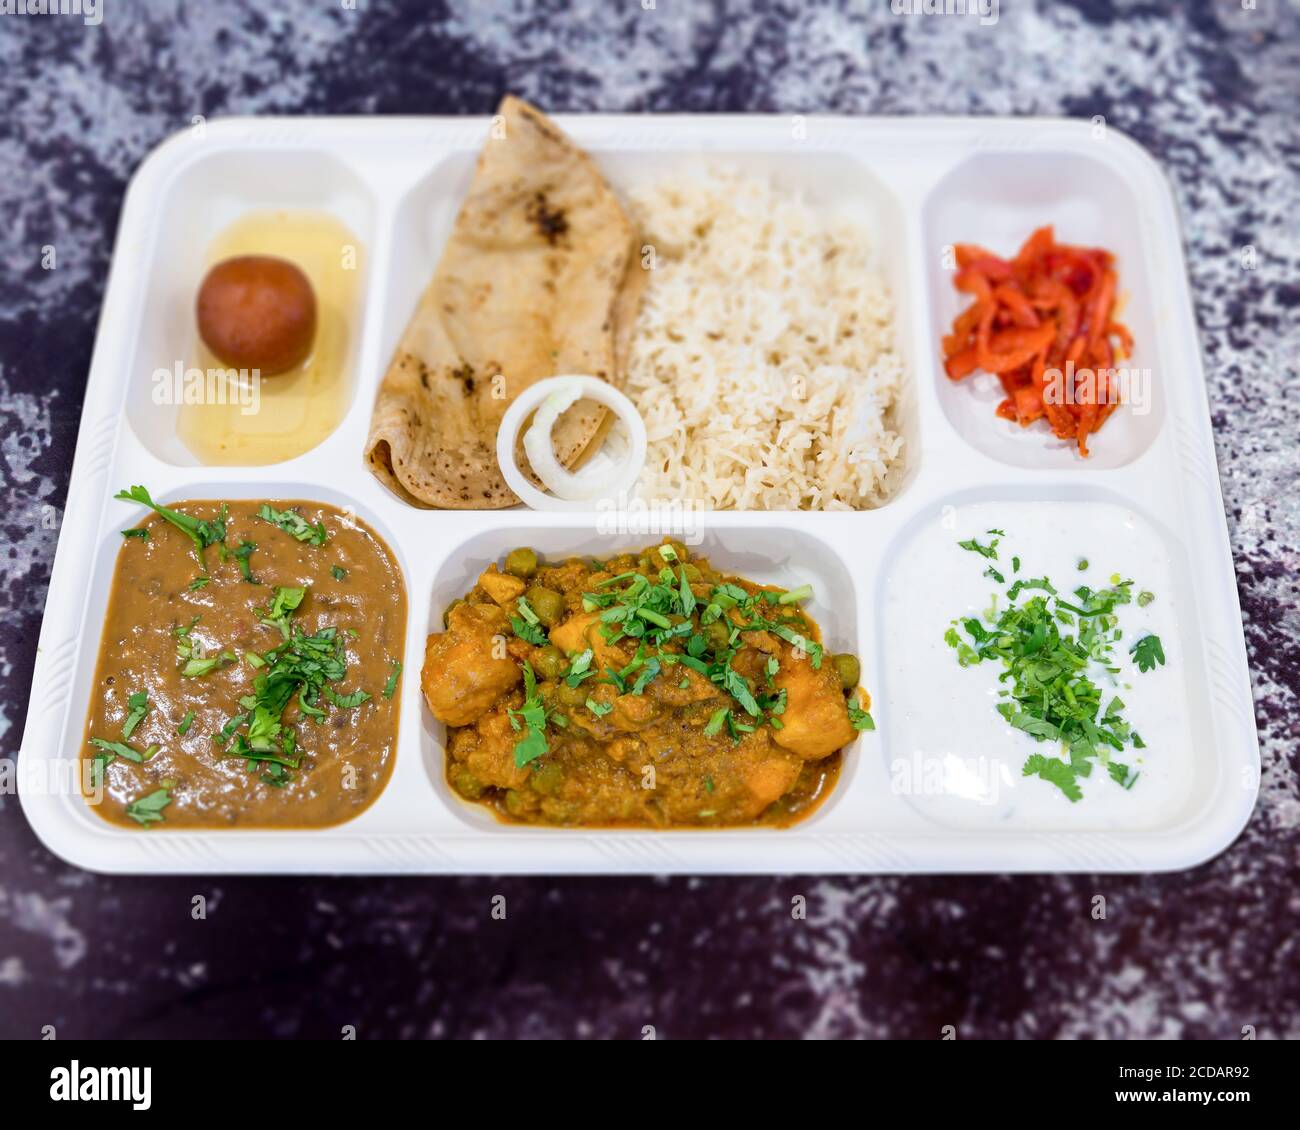 Delicious Vegetarian Thali Lunch in a Tray Stock Photo